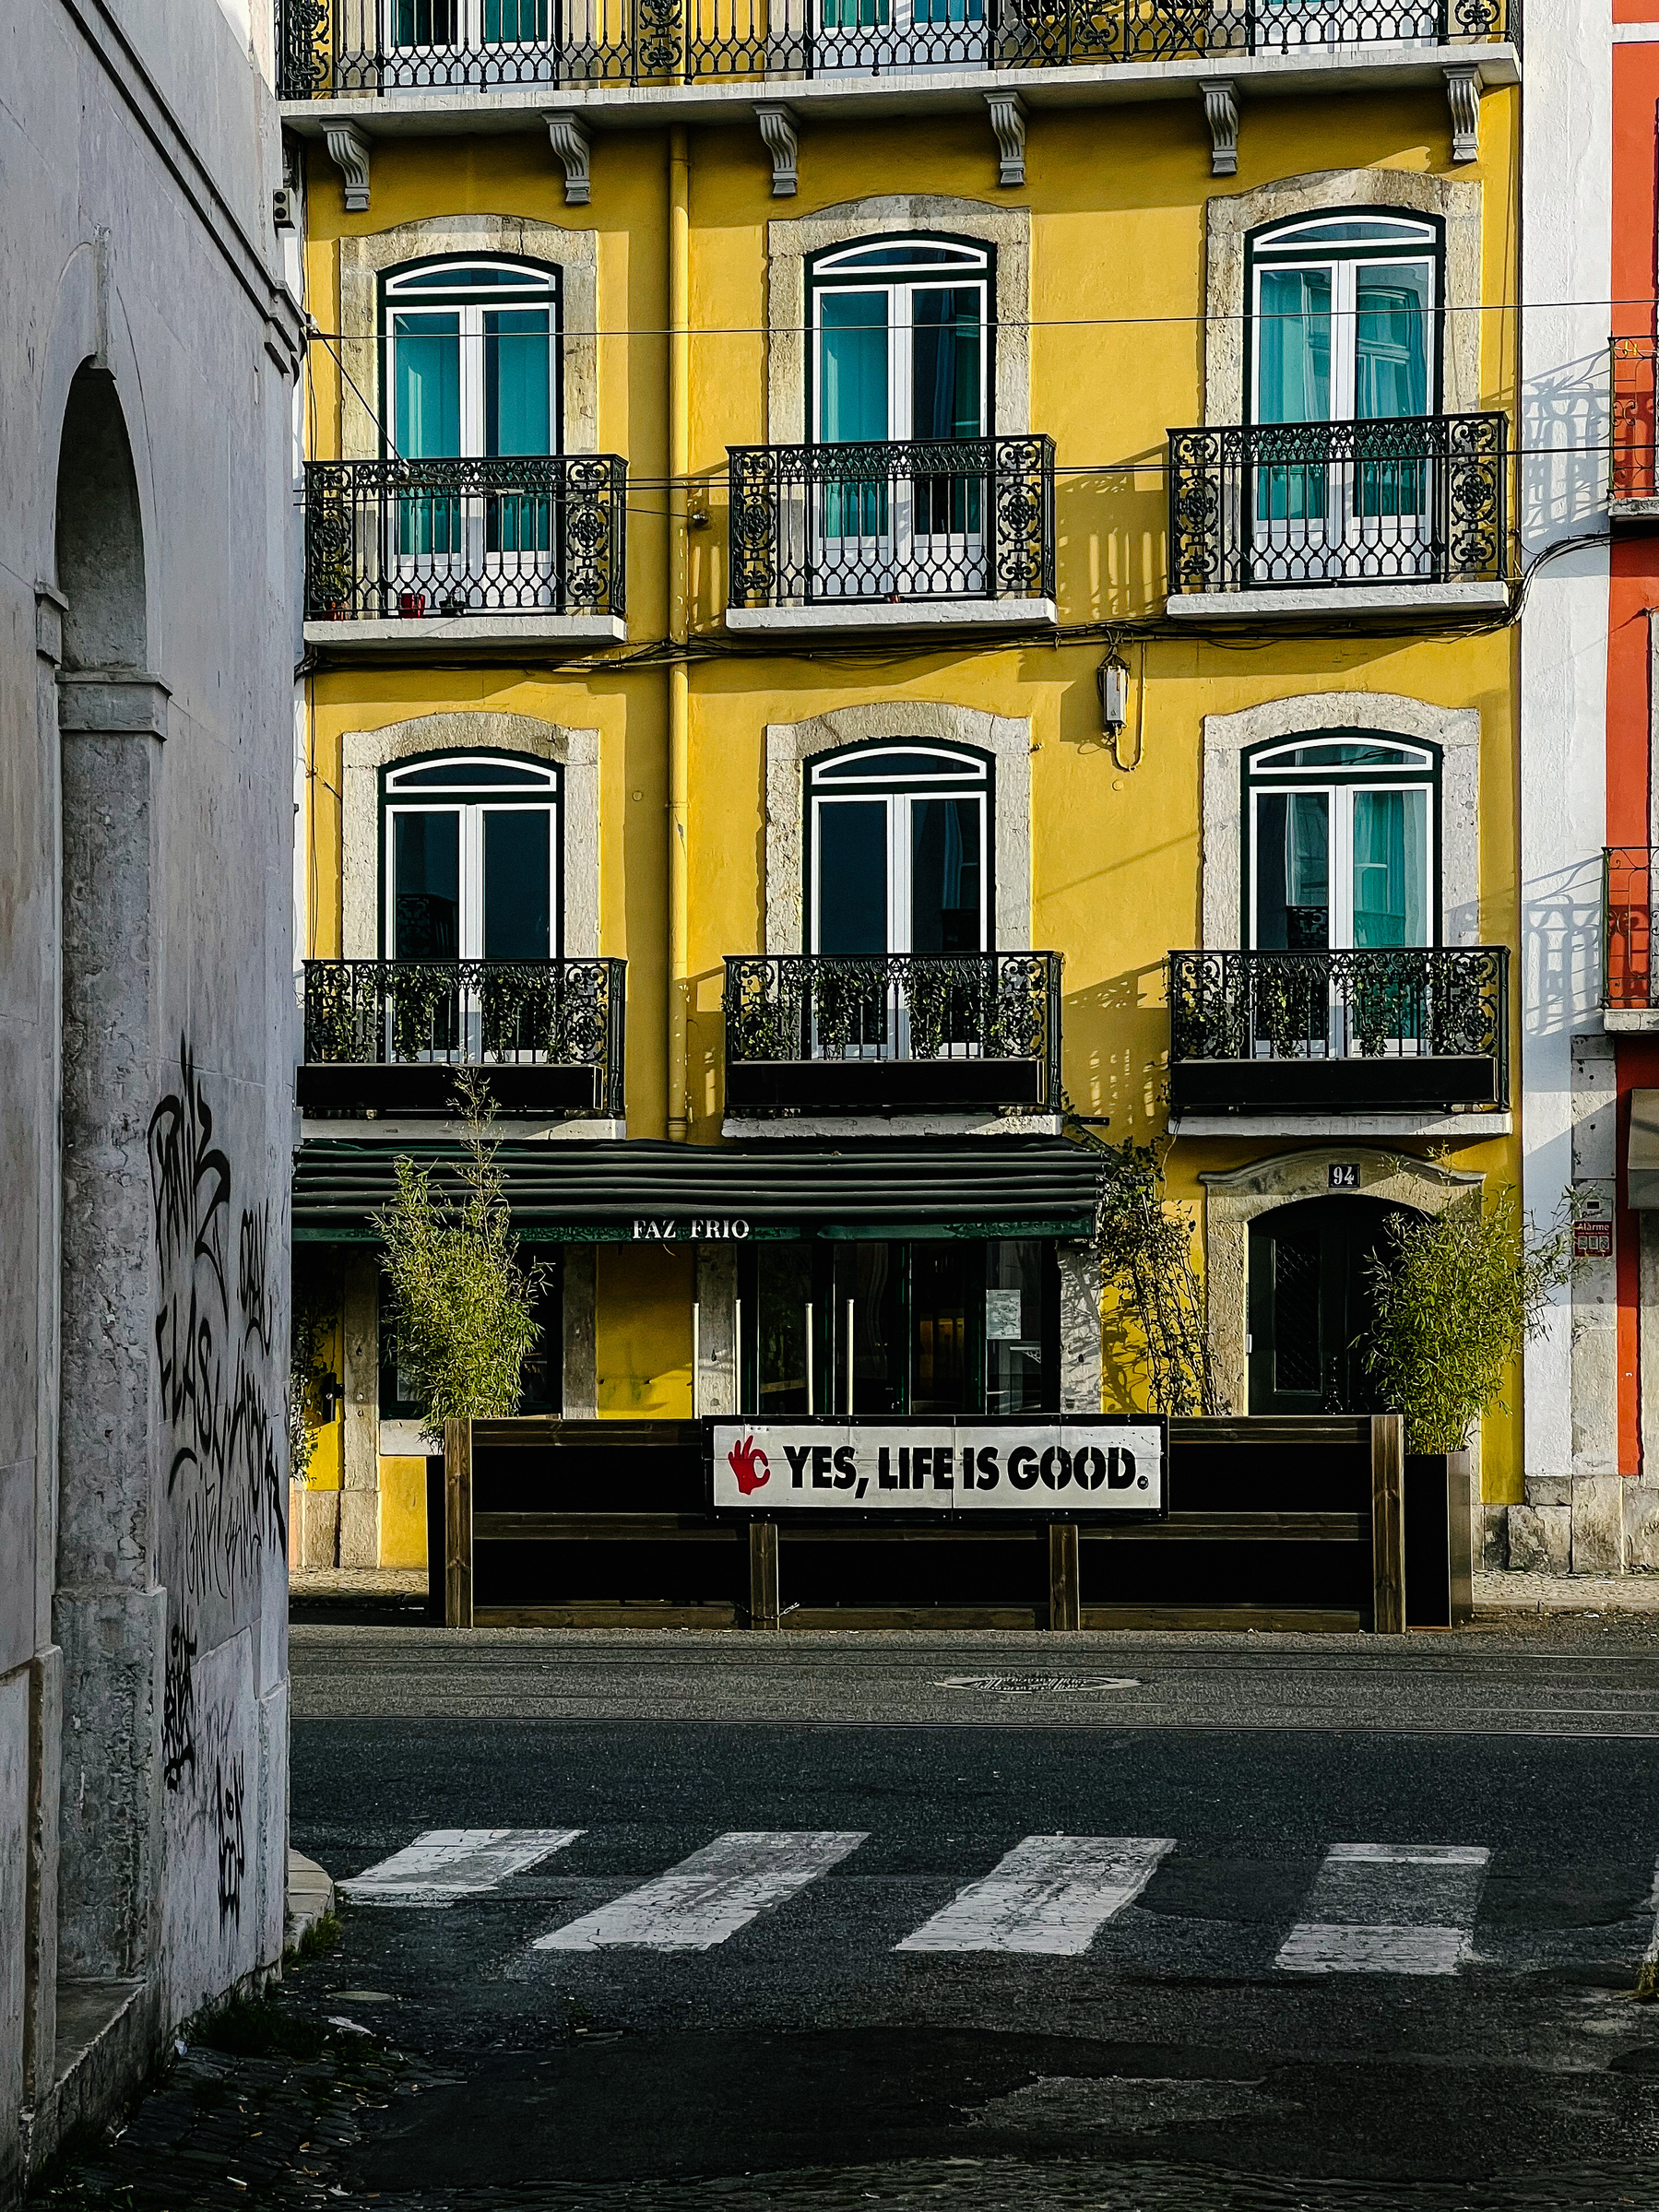 A yellow building with a sign that says “Yes, life is good”. 